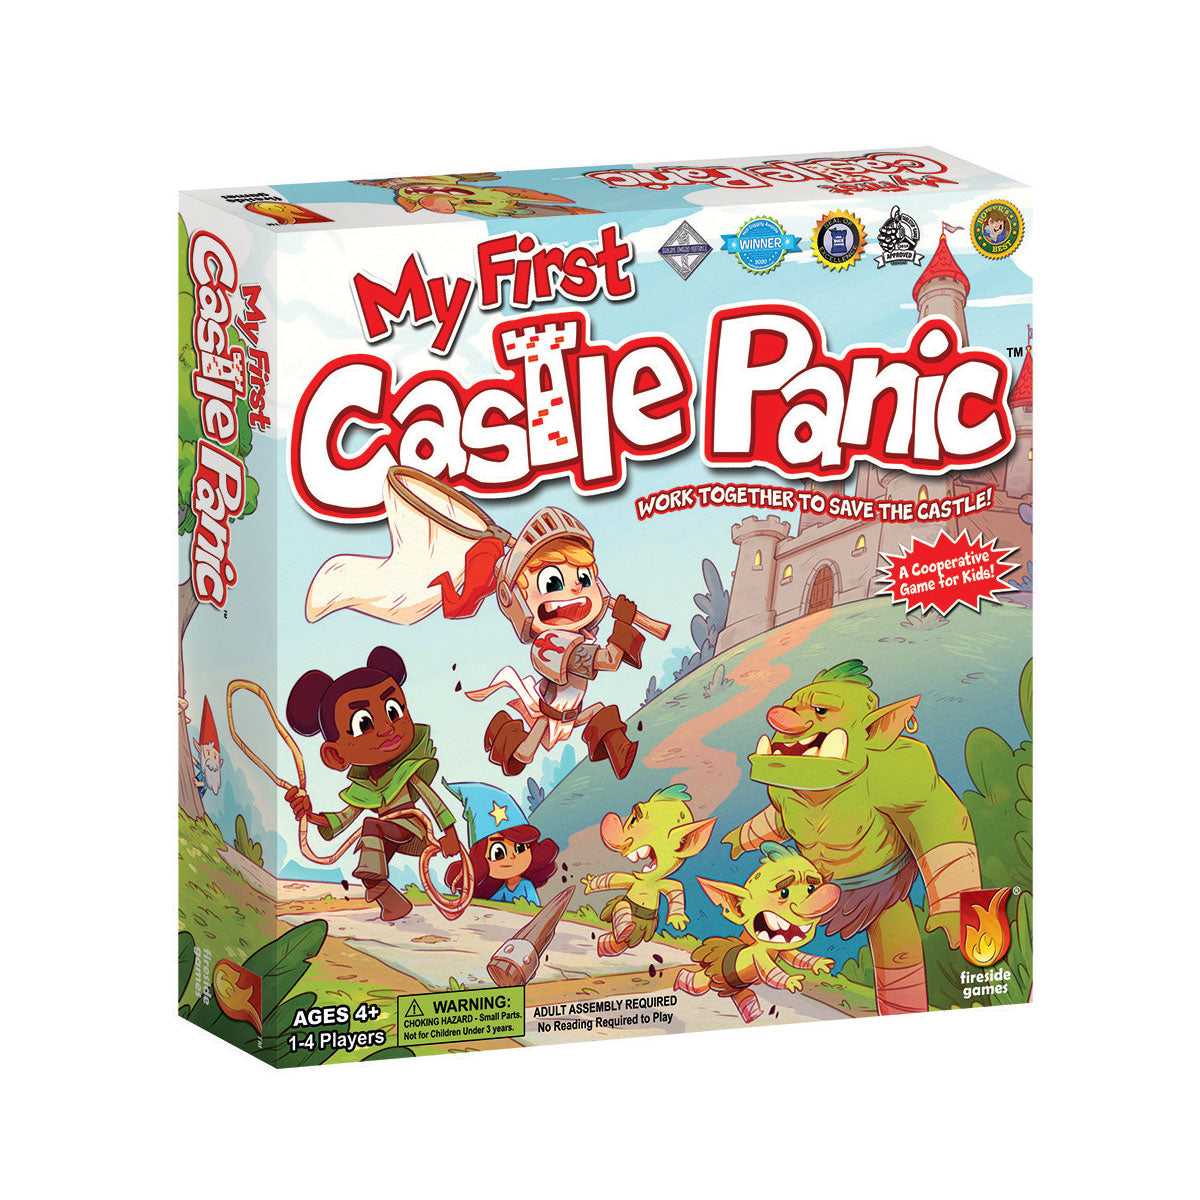 Fireside Games My First Castle Panic Cooperative Board Game